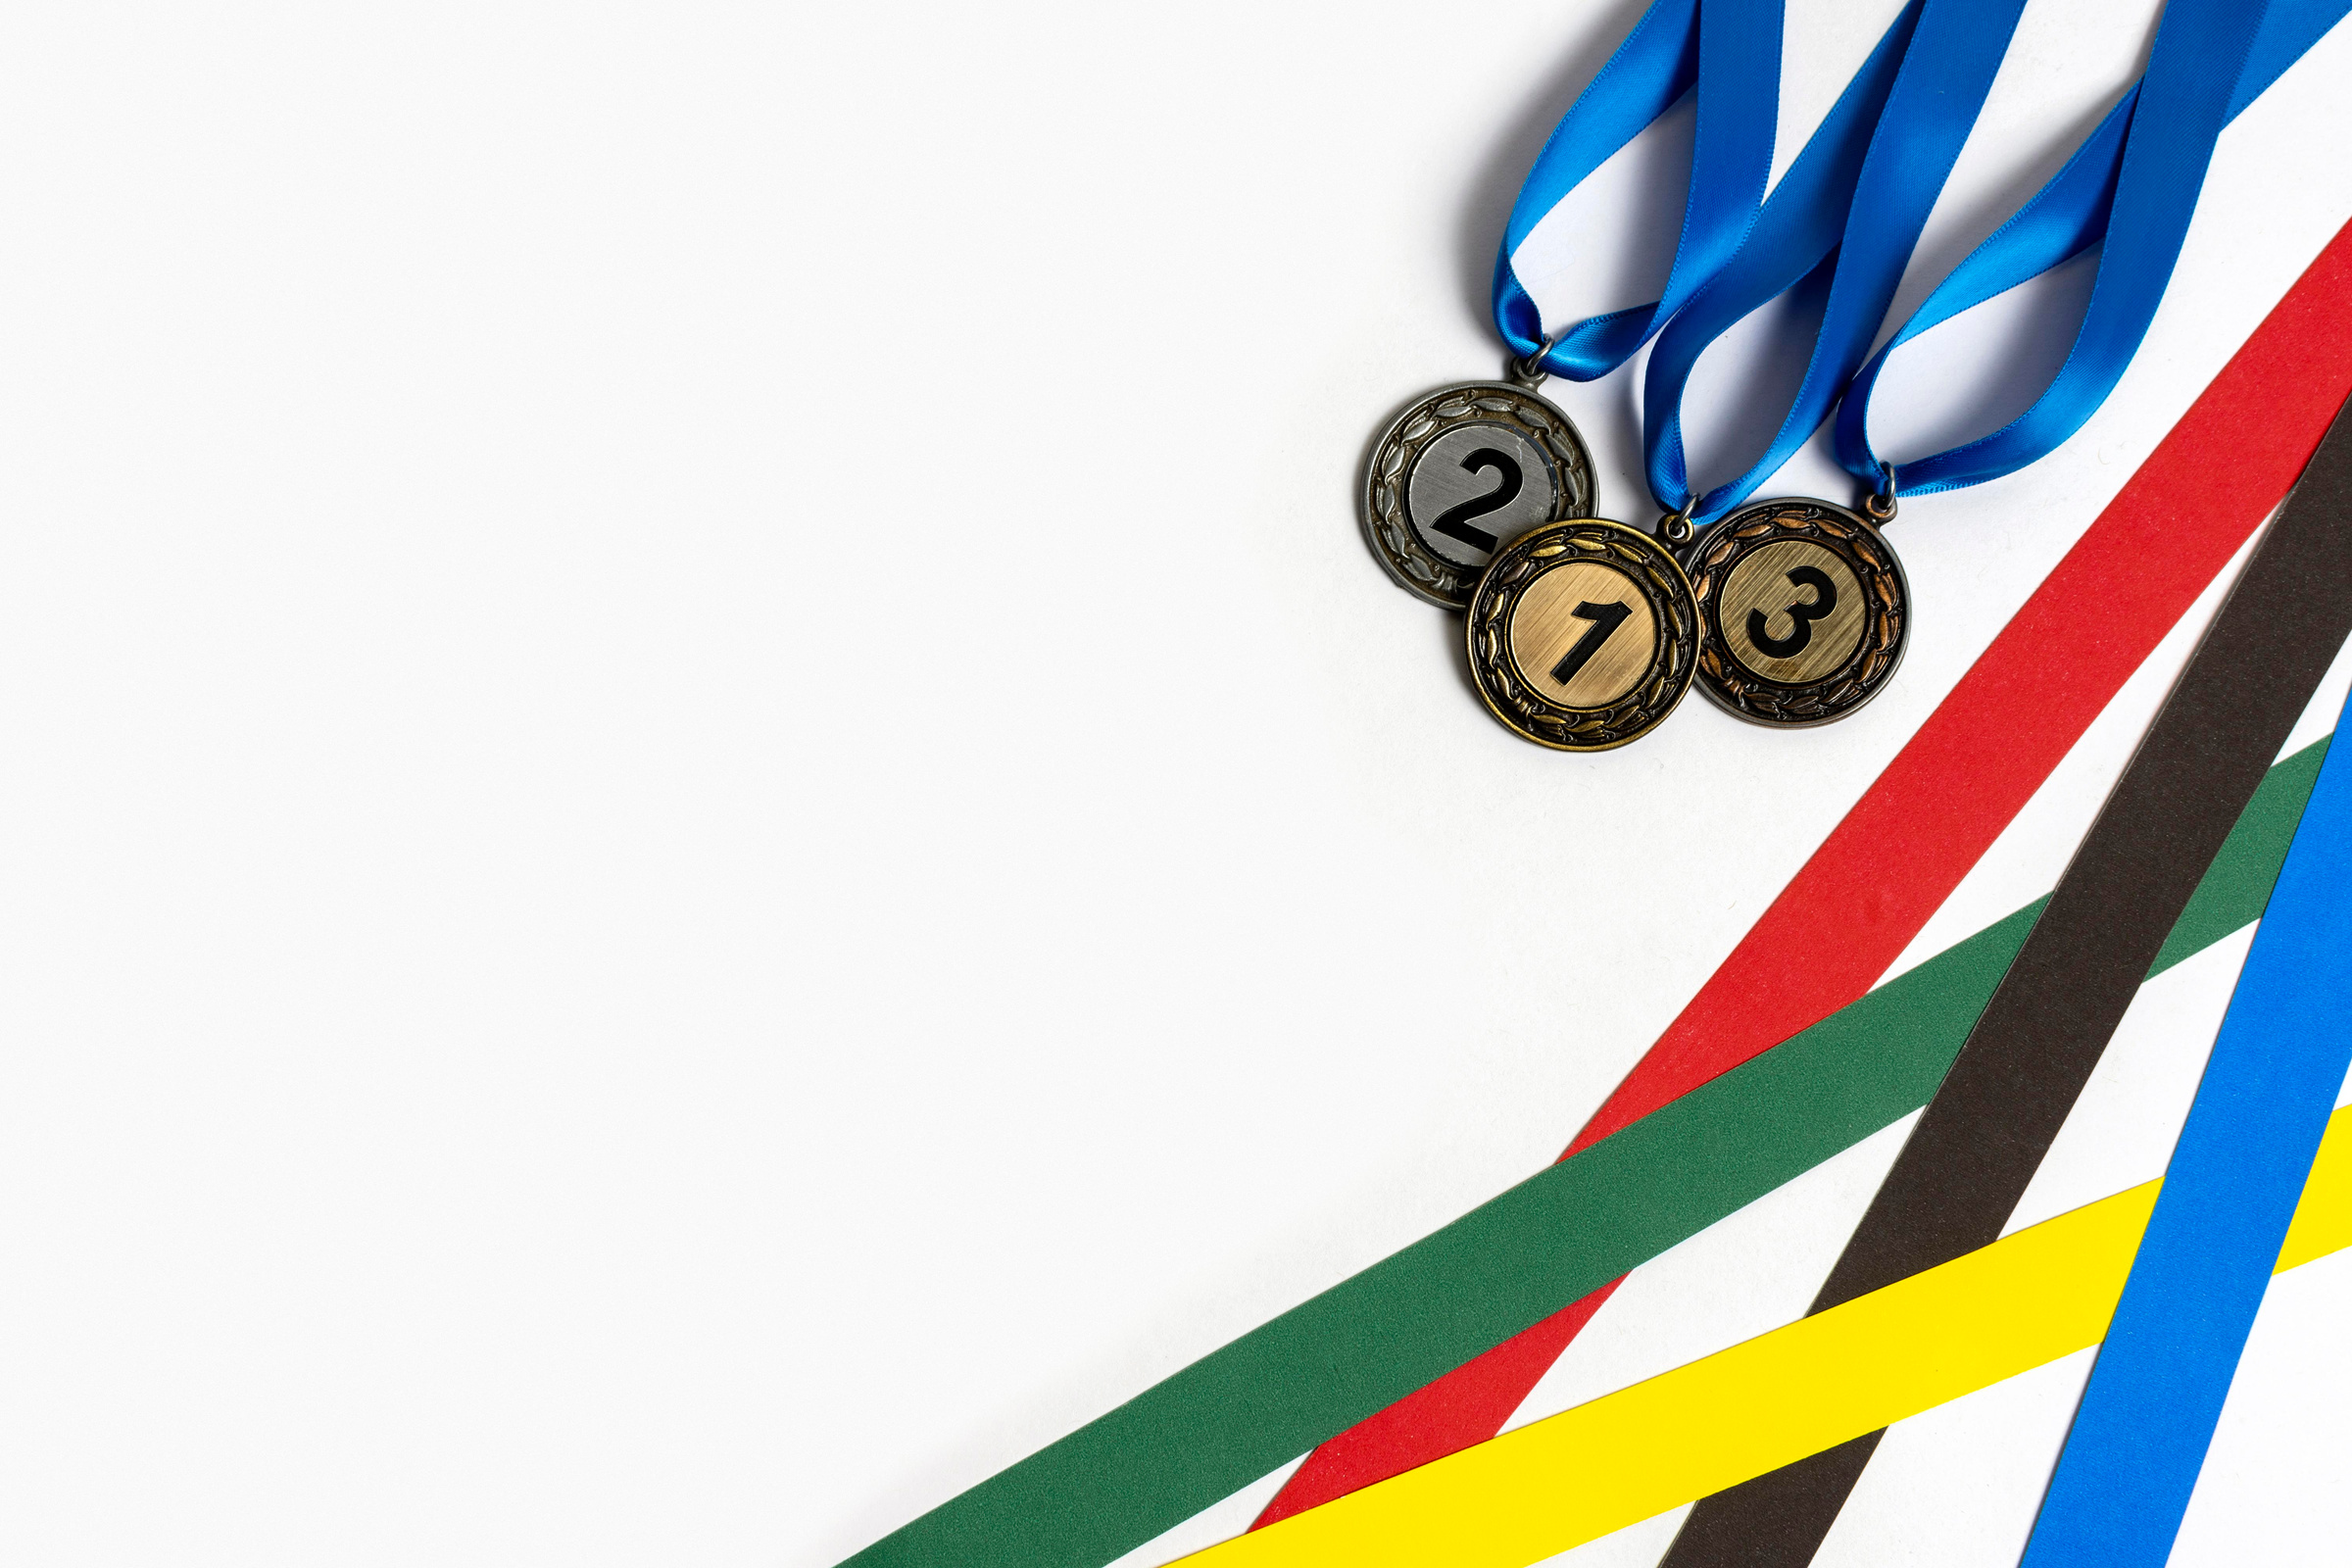 Olympics Medals and Ribbons on White Background